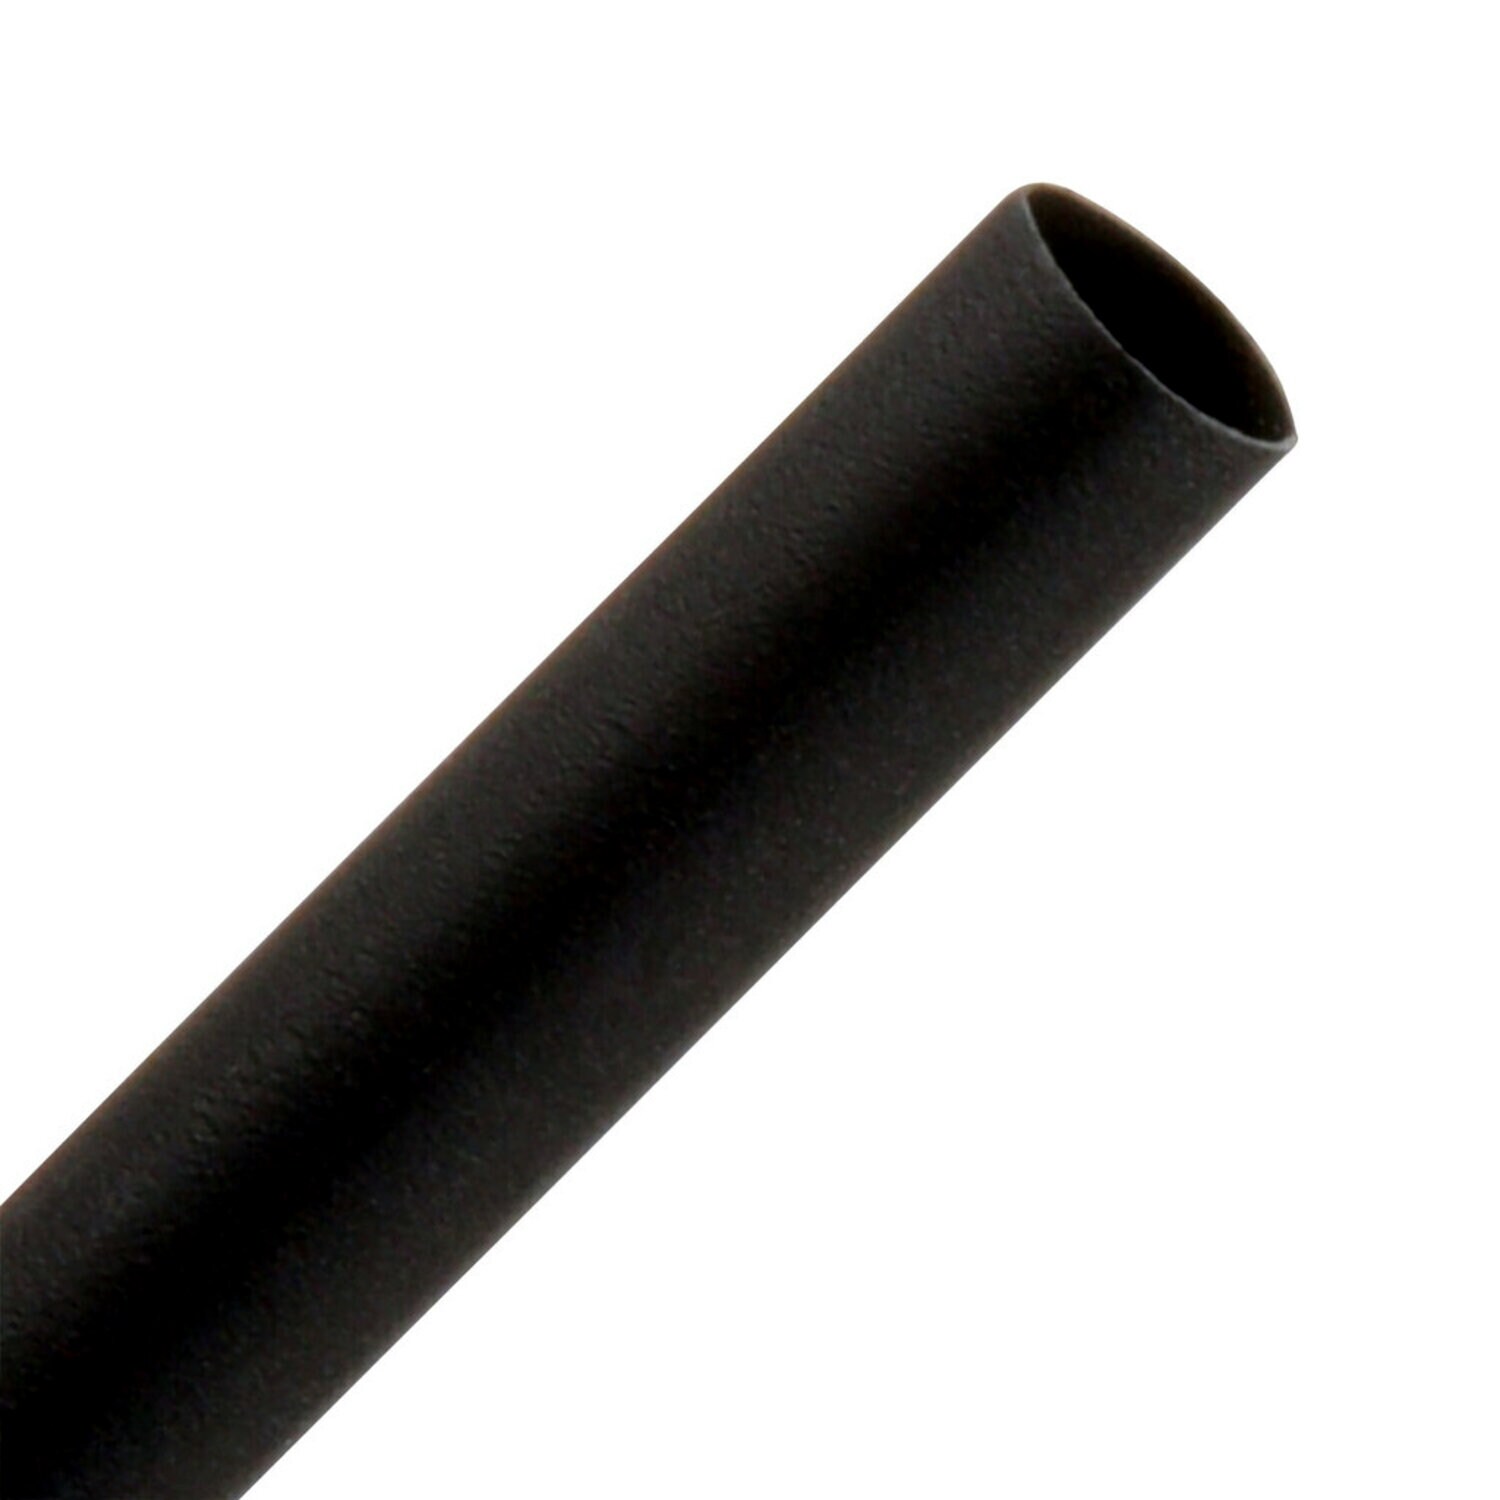 7000133692 - 3M Heat Shrink Thin-Wall Tubing FP-301-3/16-6"-Black-10-10 Pc Pks, 6 in
Length pieces, 10 pieces/pack, 10 packs/case